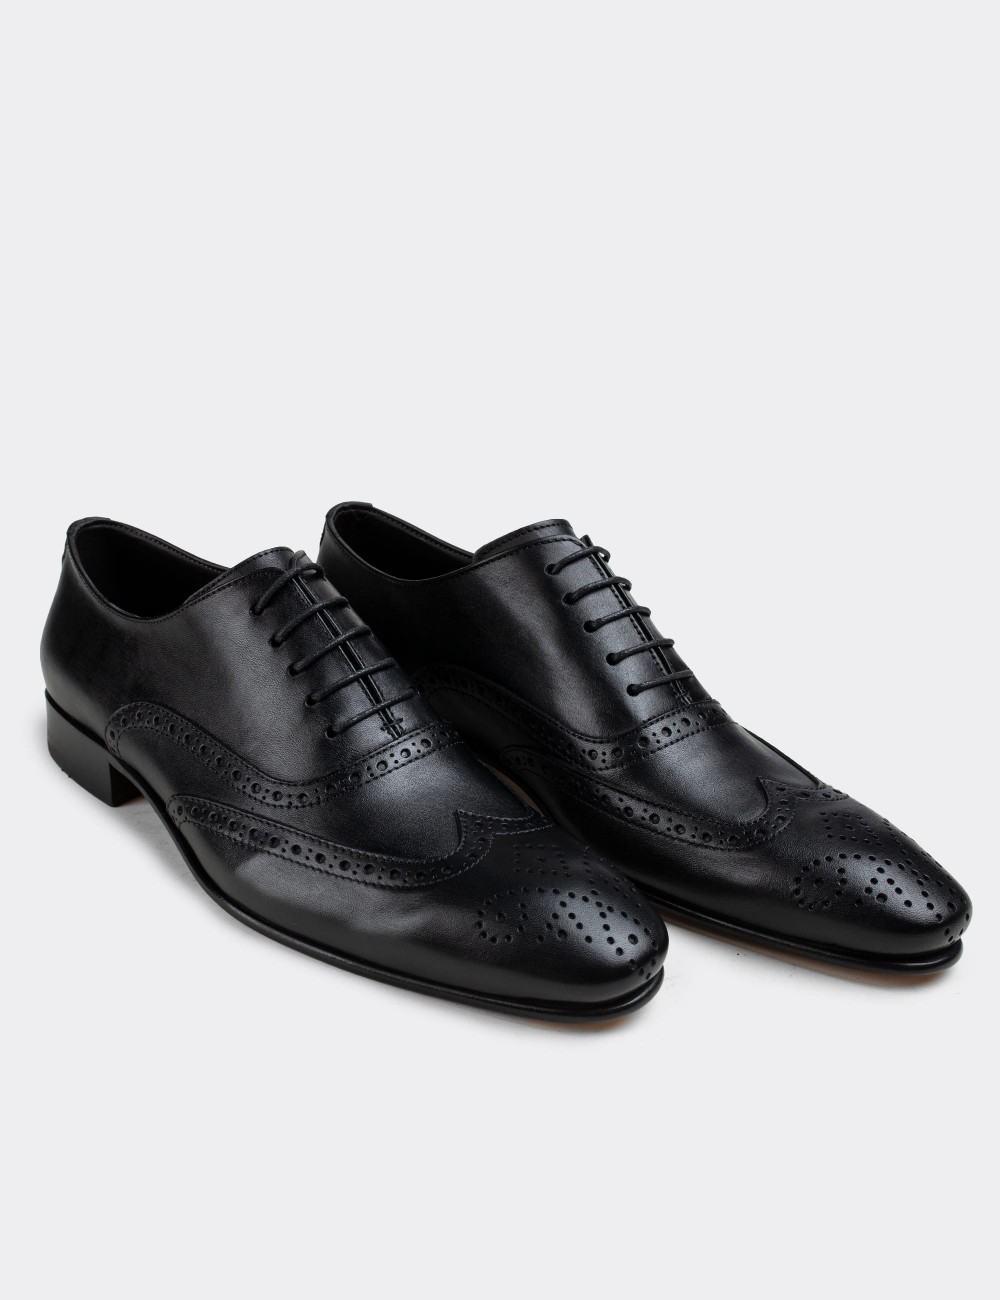 Black  Leather Classic Shoes - 01785MSYHK02